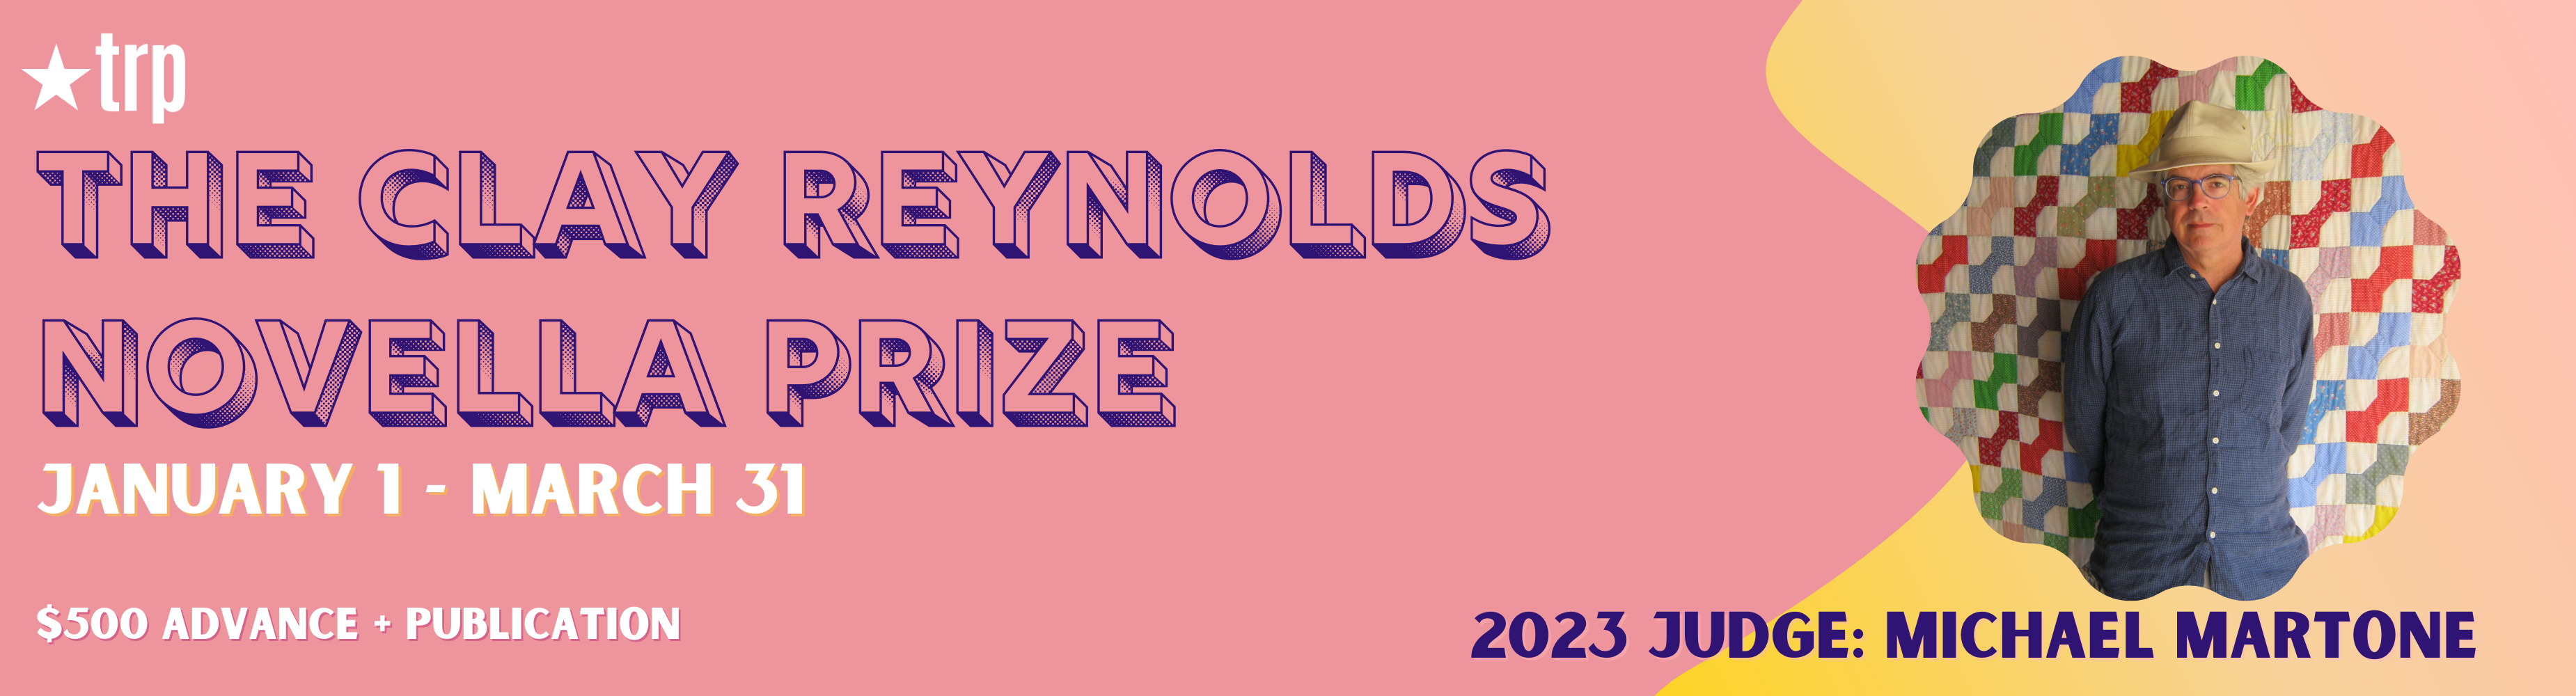 The Clay Reynolds Novella Prize. January 1 through March 31. $500 advance + publication.